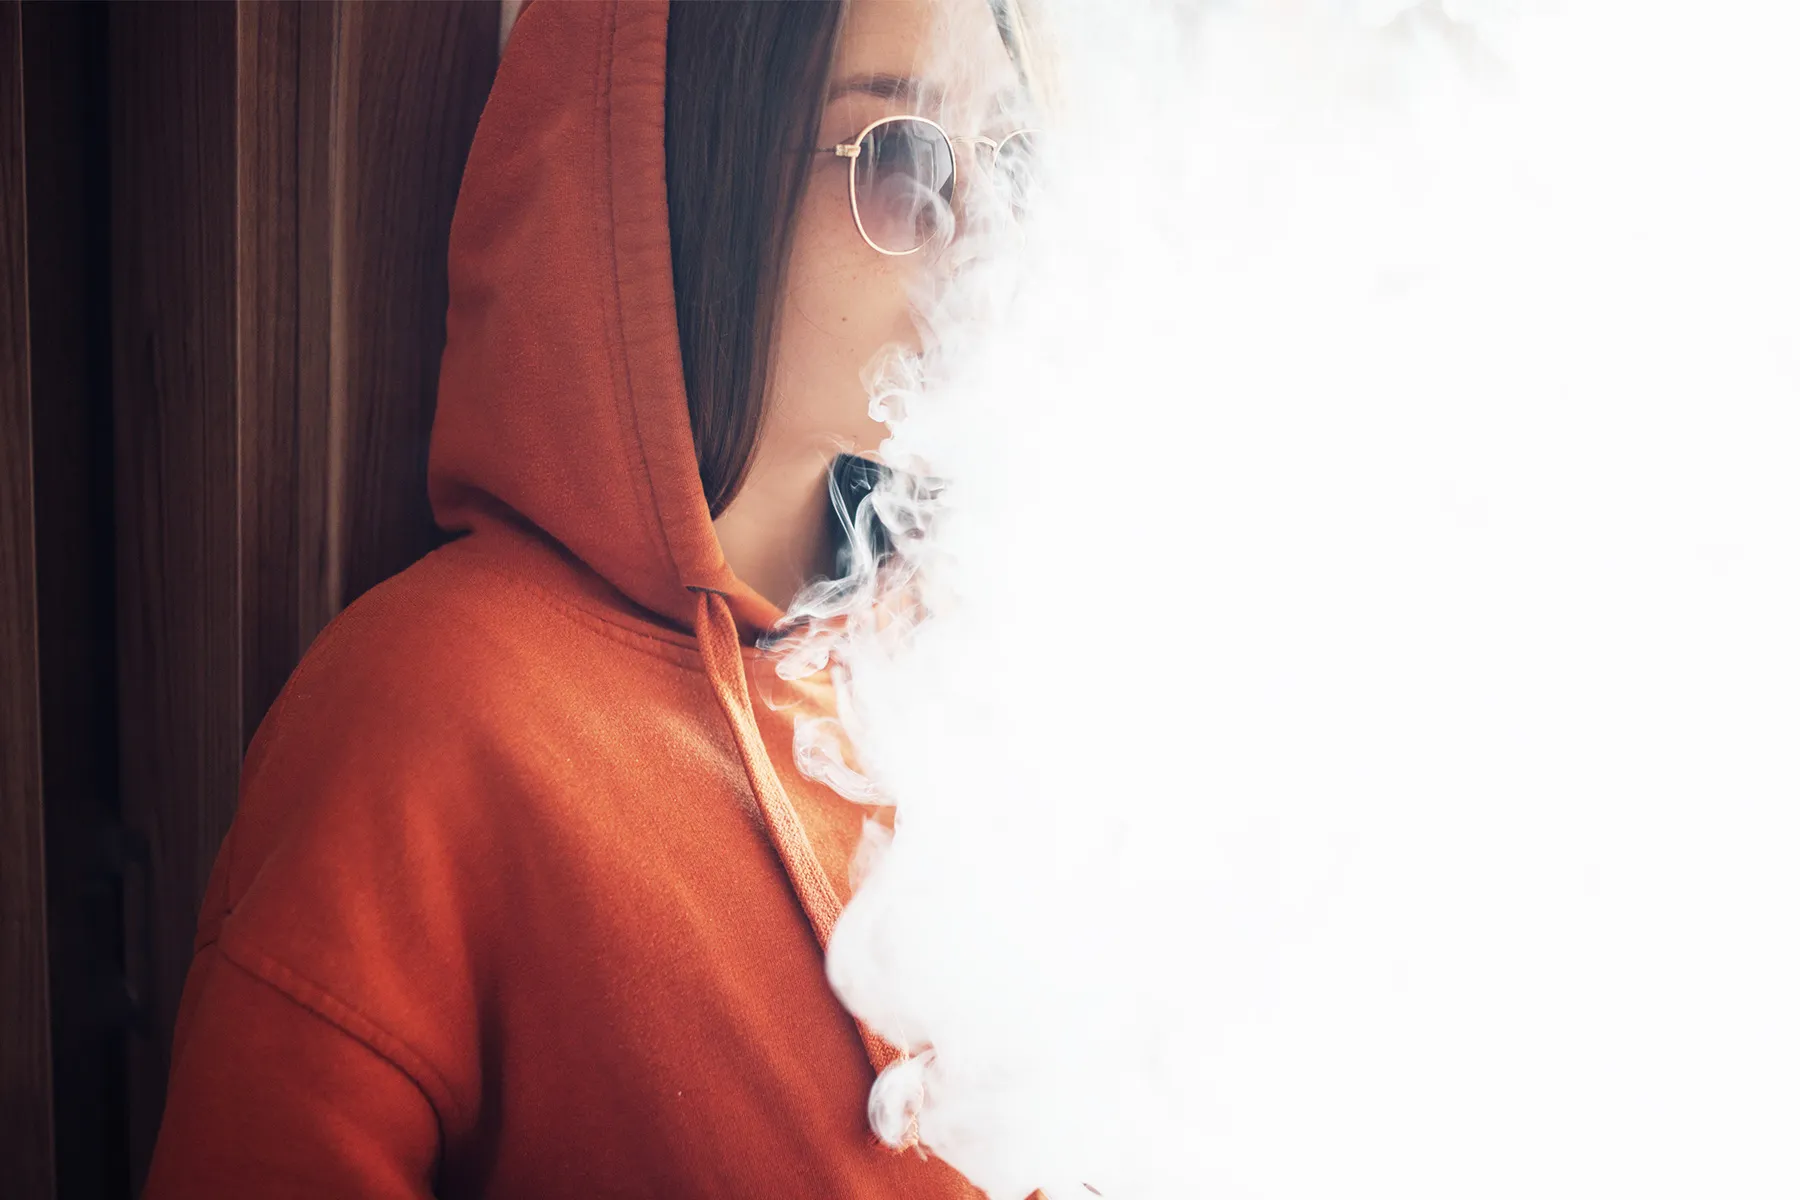 Is There a Link Between Vaping and Eating Disorders in the Young?